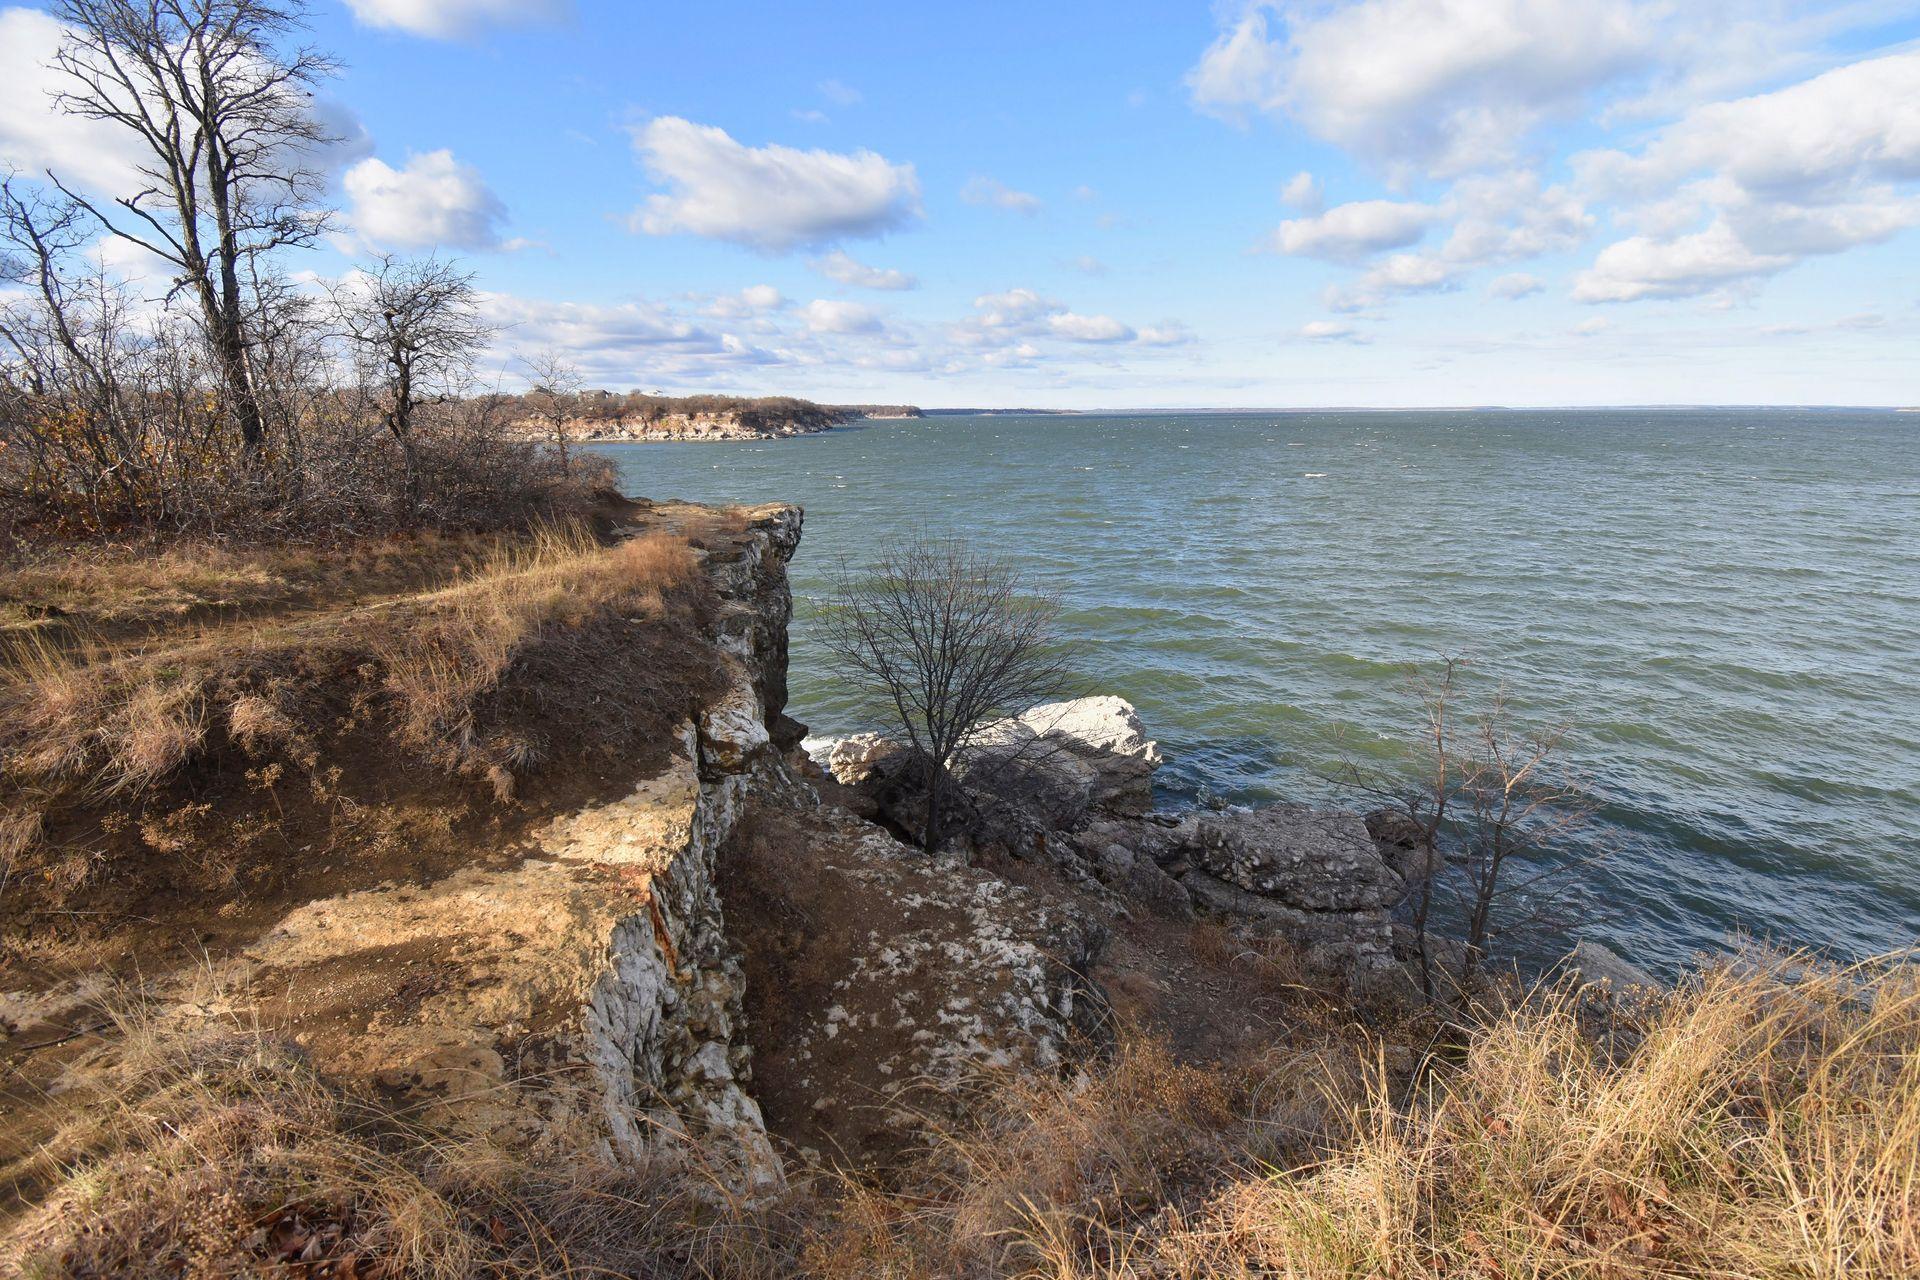 An area of cliffs along the water at Eisenhower State Park.